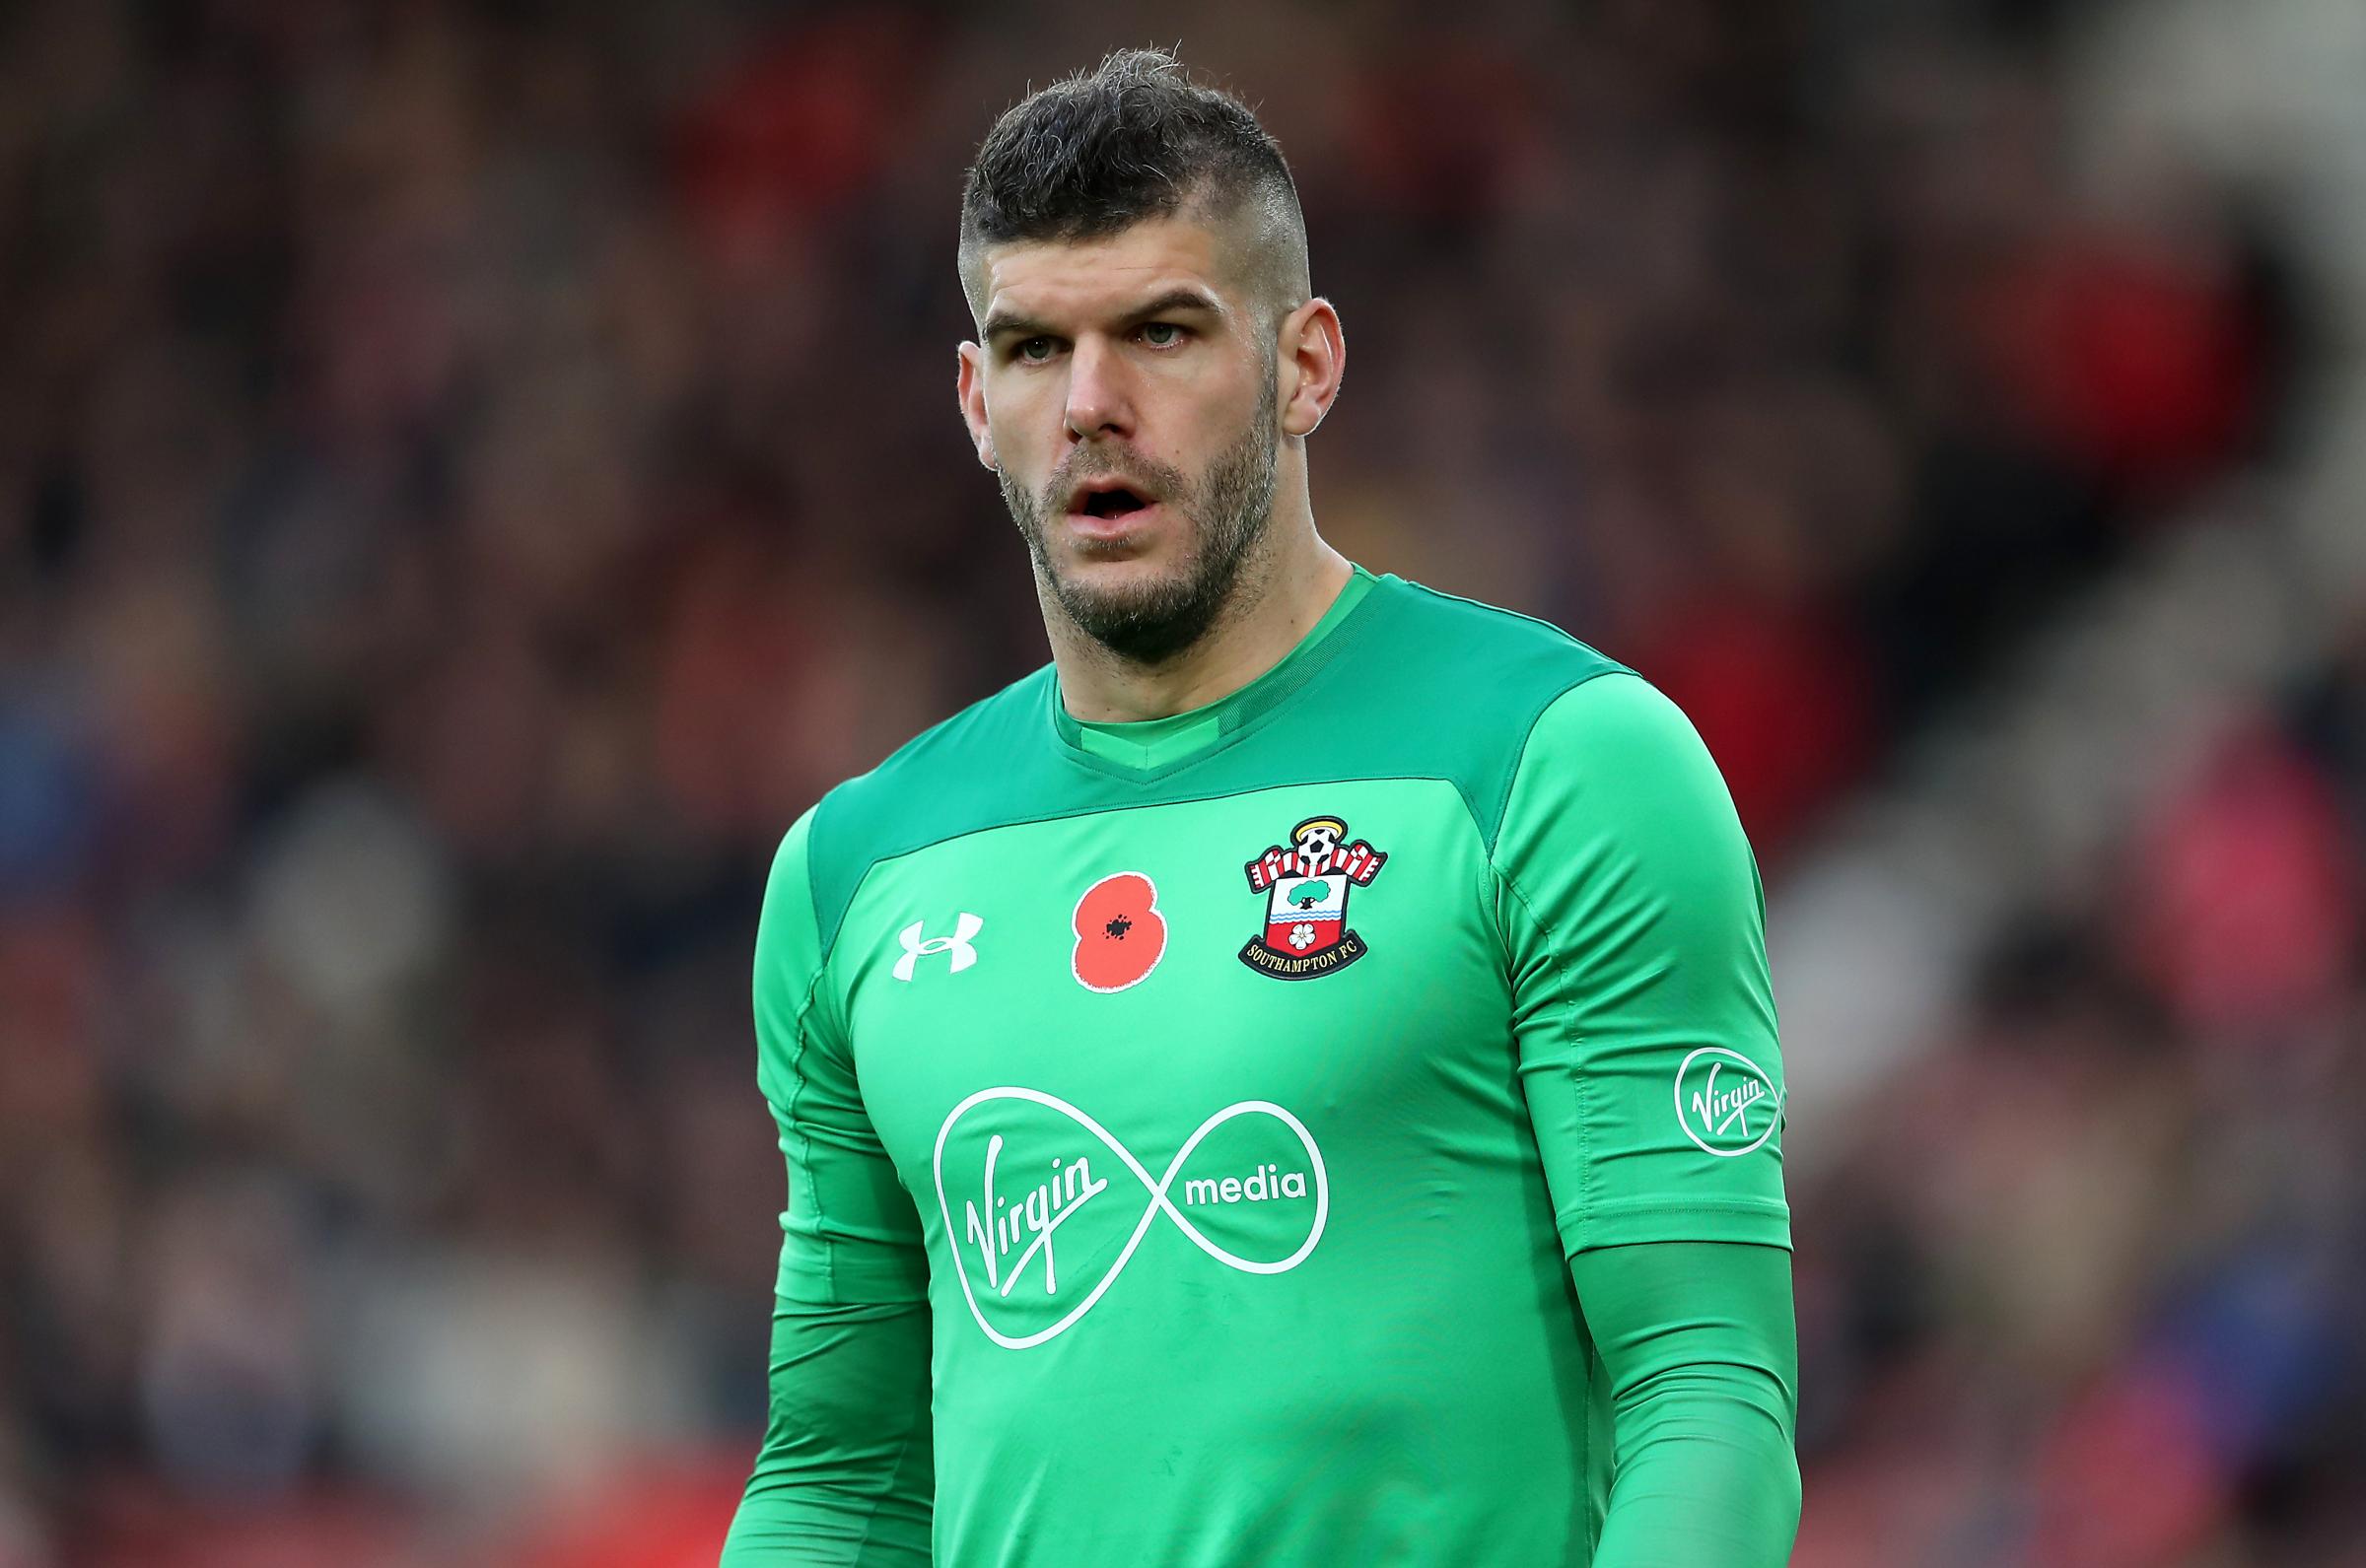 Fraser Forster's been handed the chance to impress Ralph Hasenhuttl